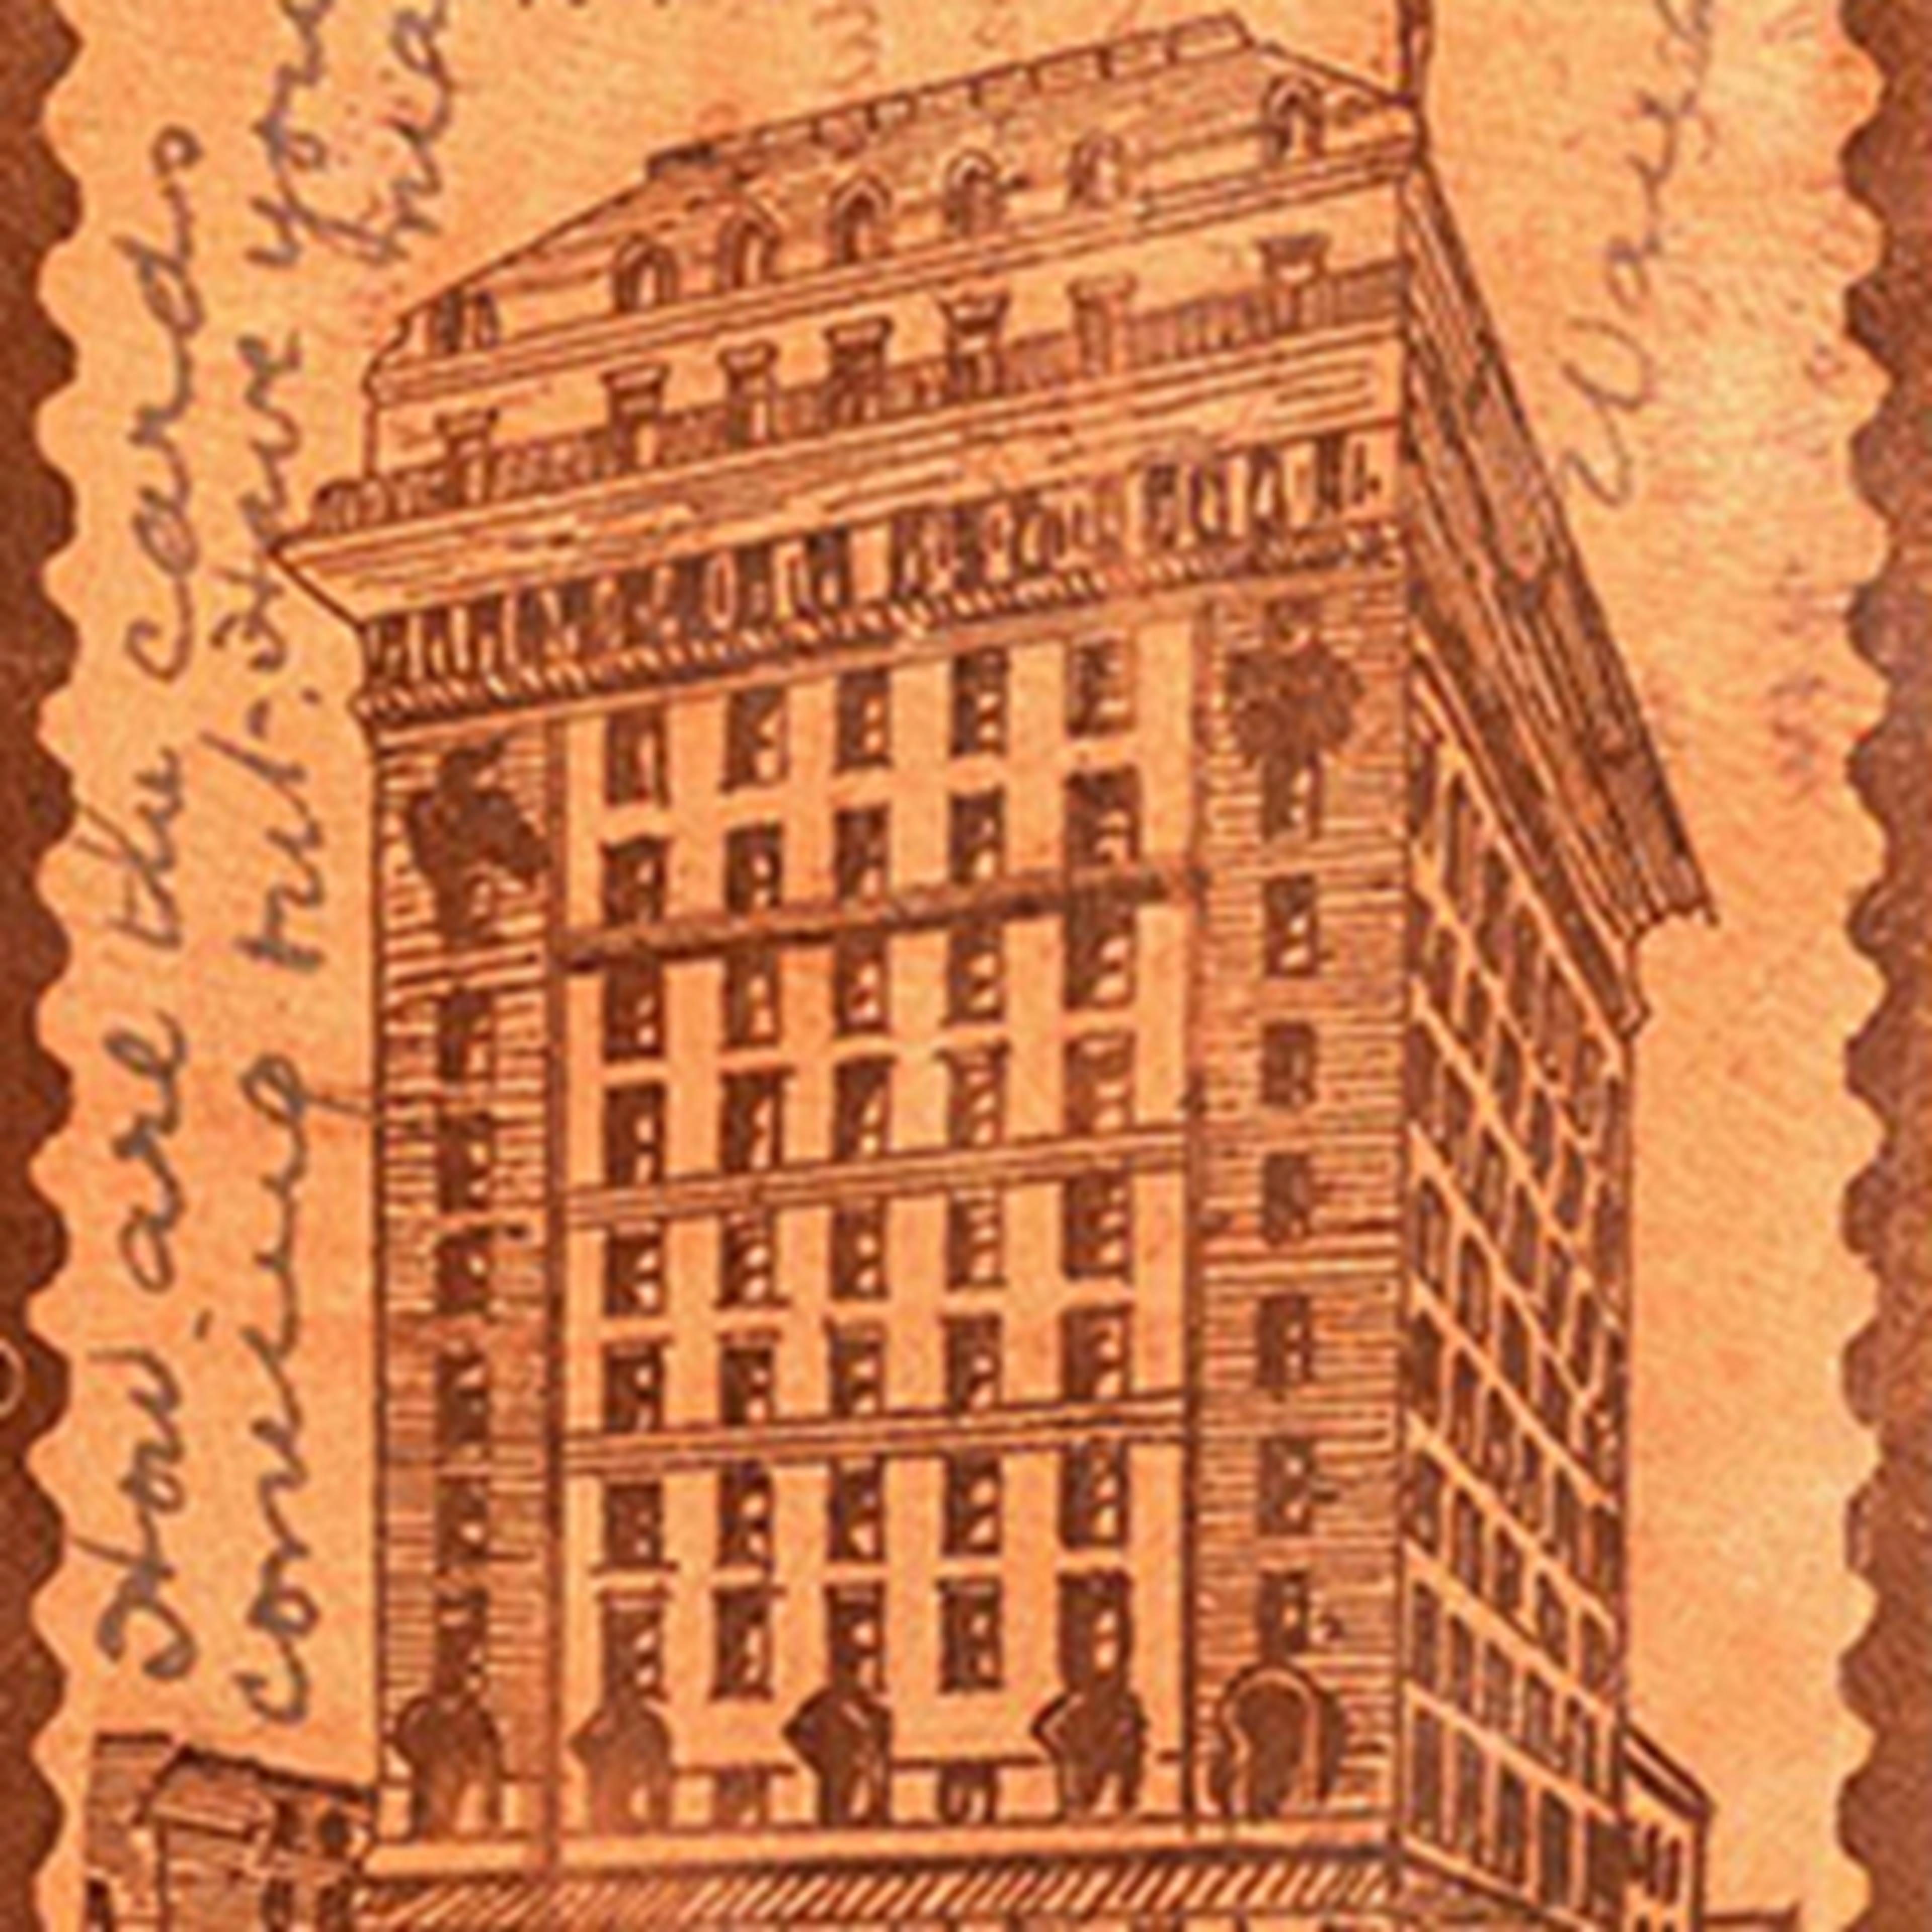 Image of a stamp with an official building 